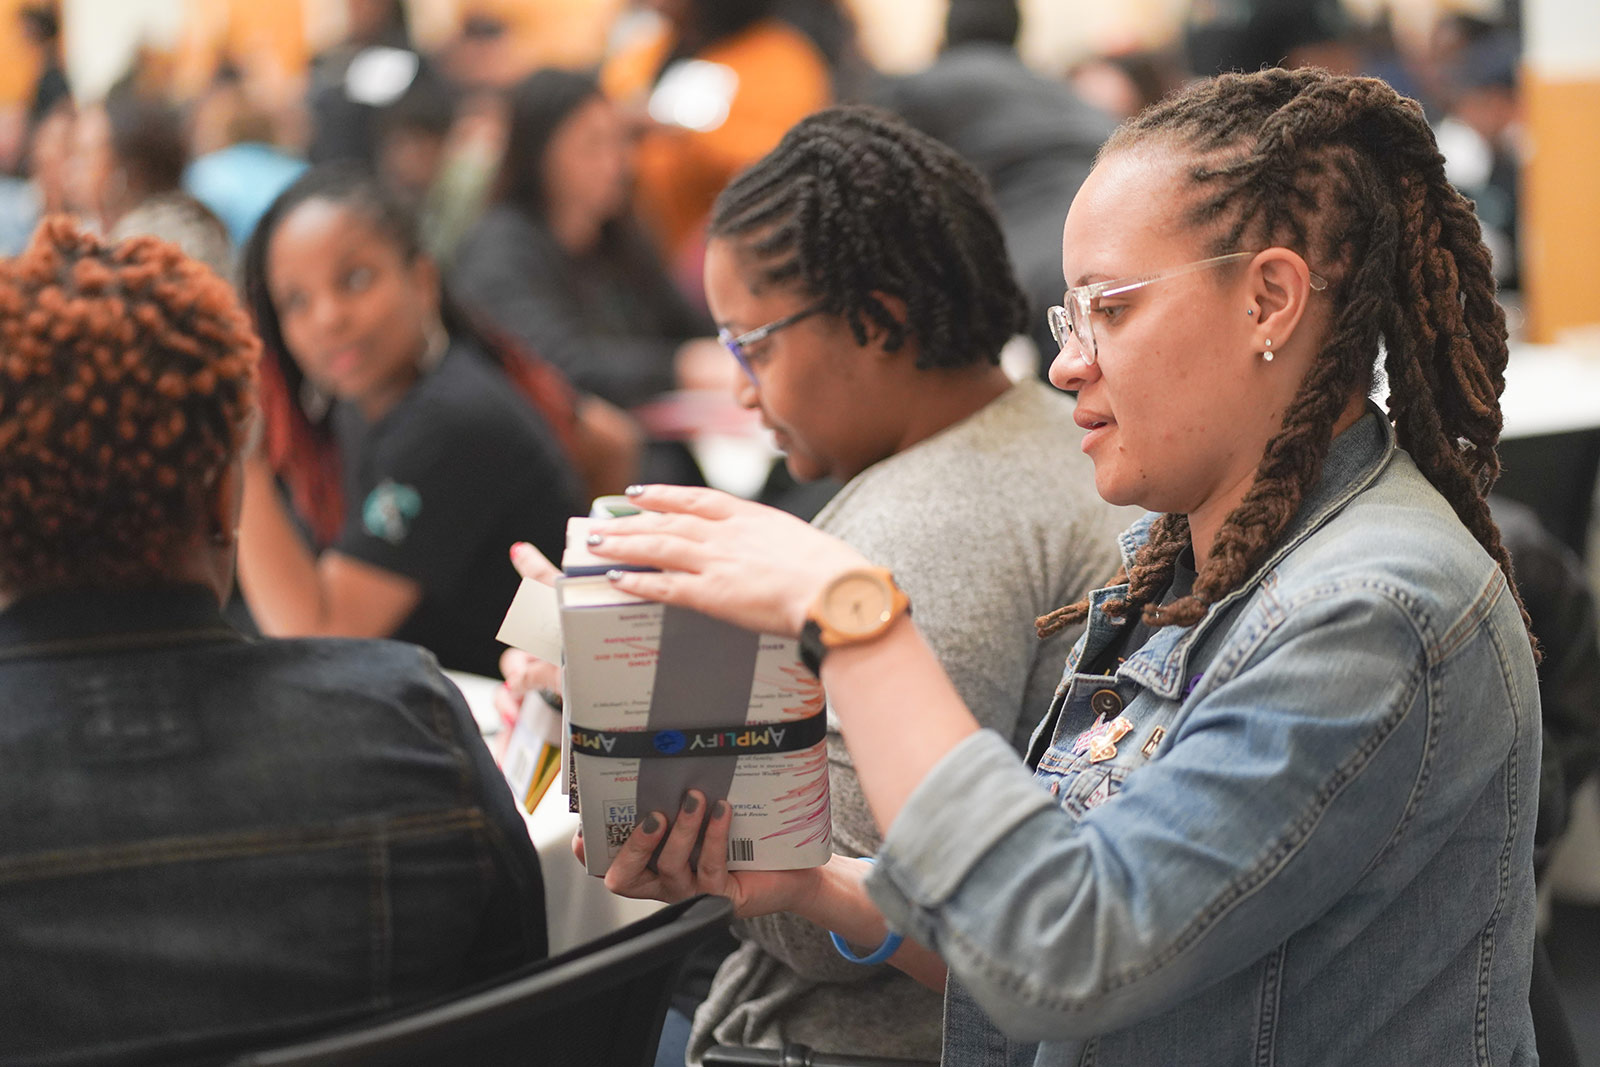 Amplify 2020 attendee holds a bundle of books